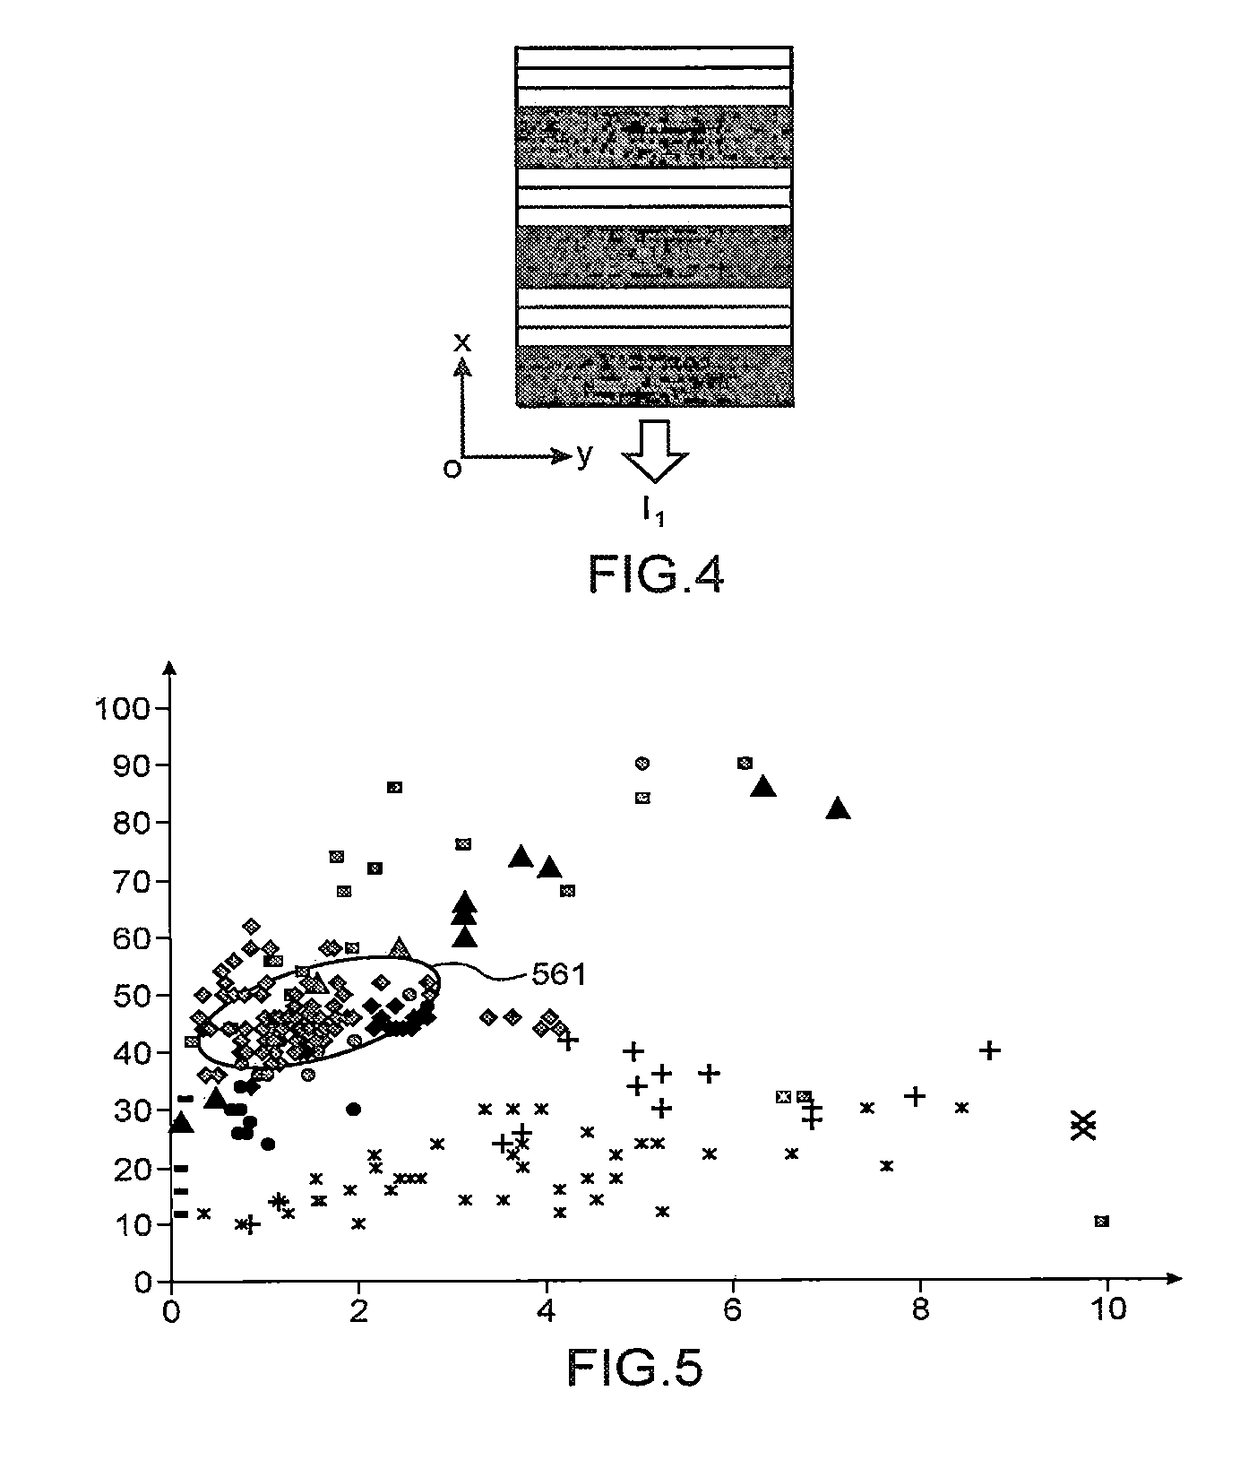 Method for recognising a false papillary print by structured lighting